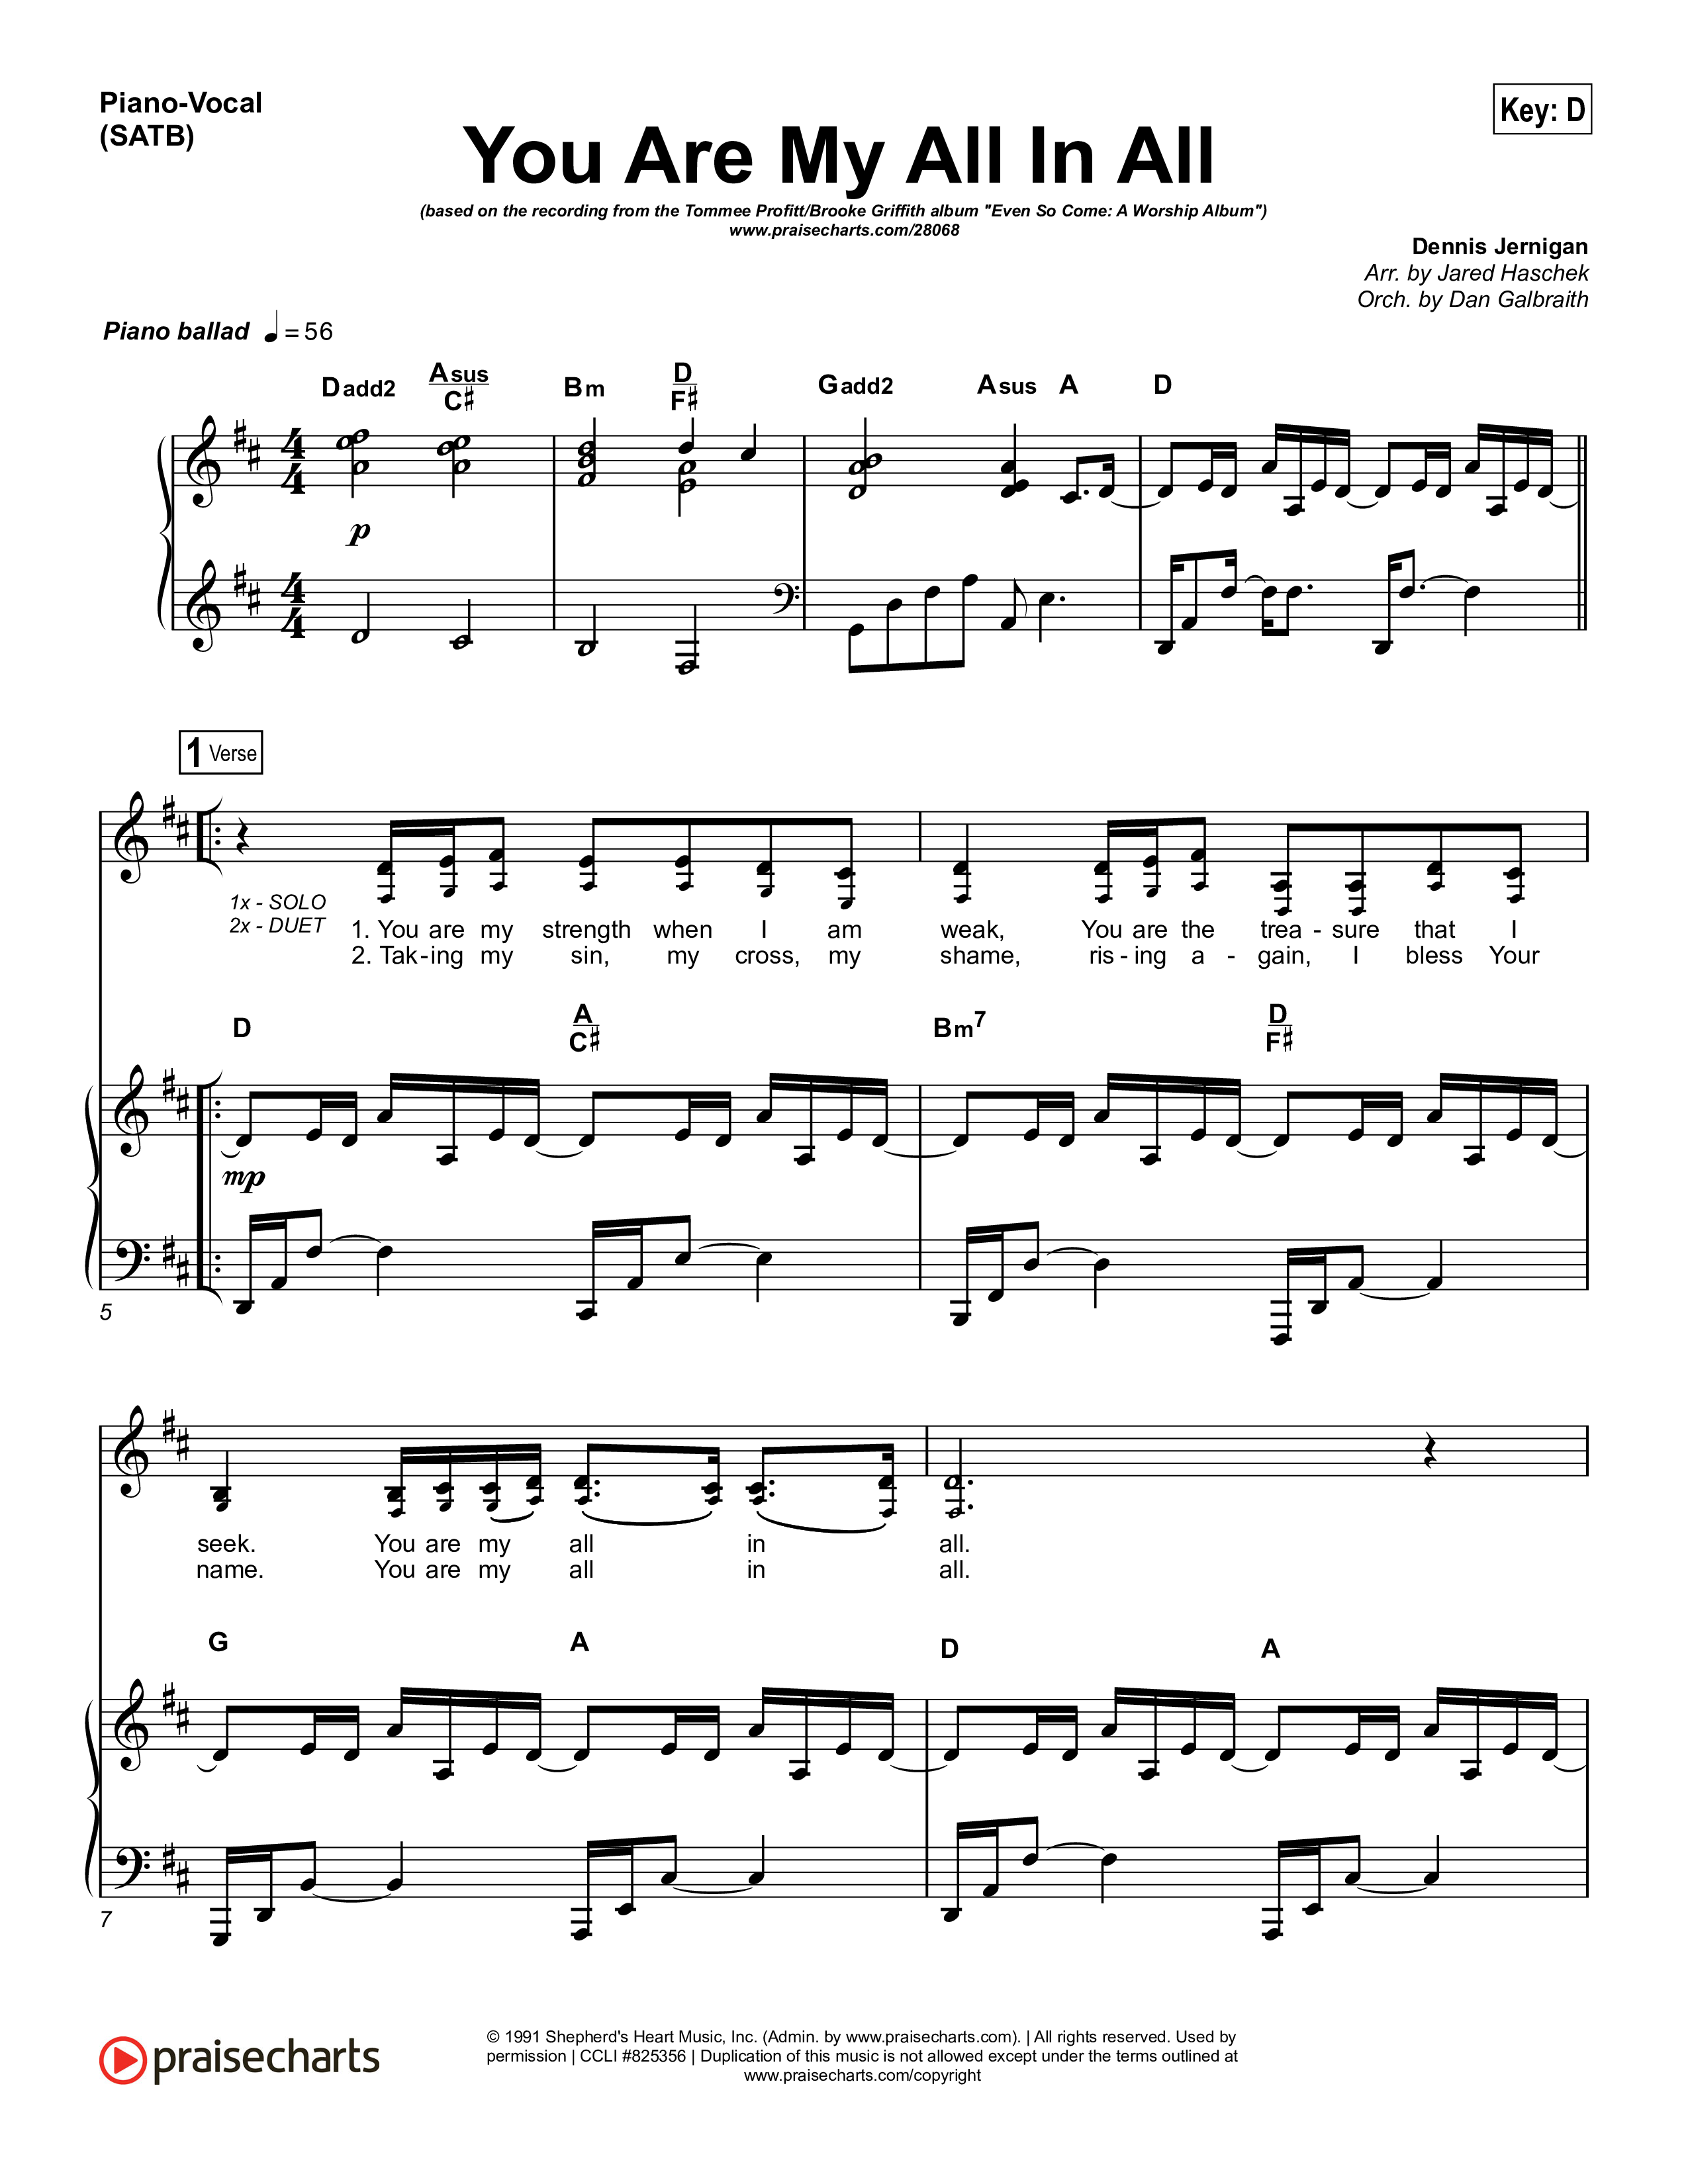 You Are My All In All Piano/Vocal (SATB) (Tommee Profitt & Brooke Griffith)